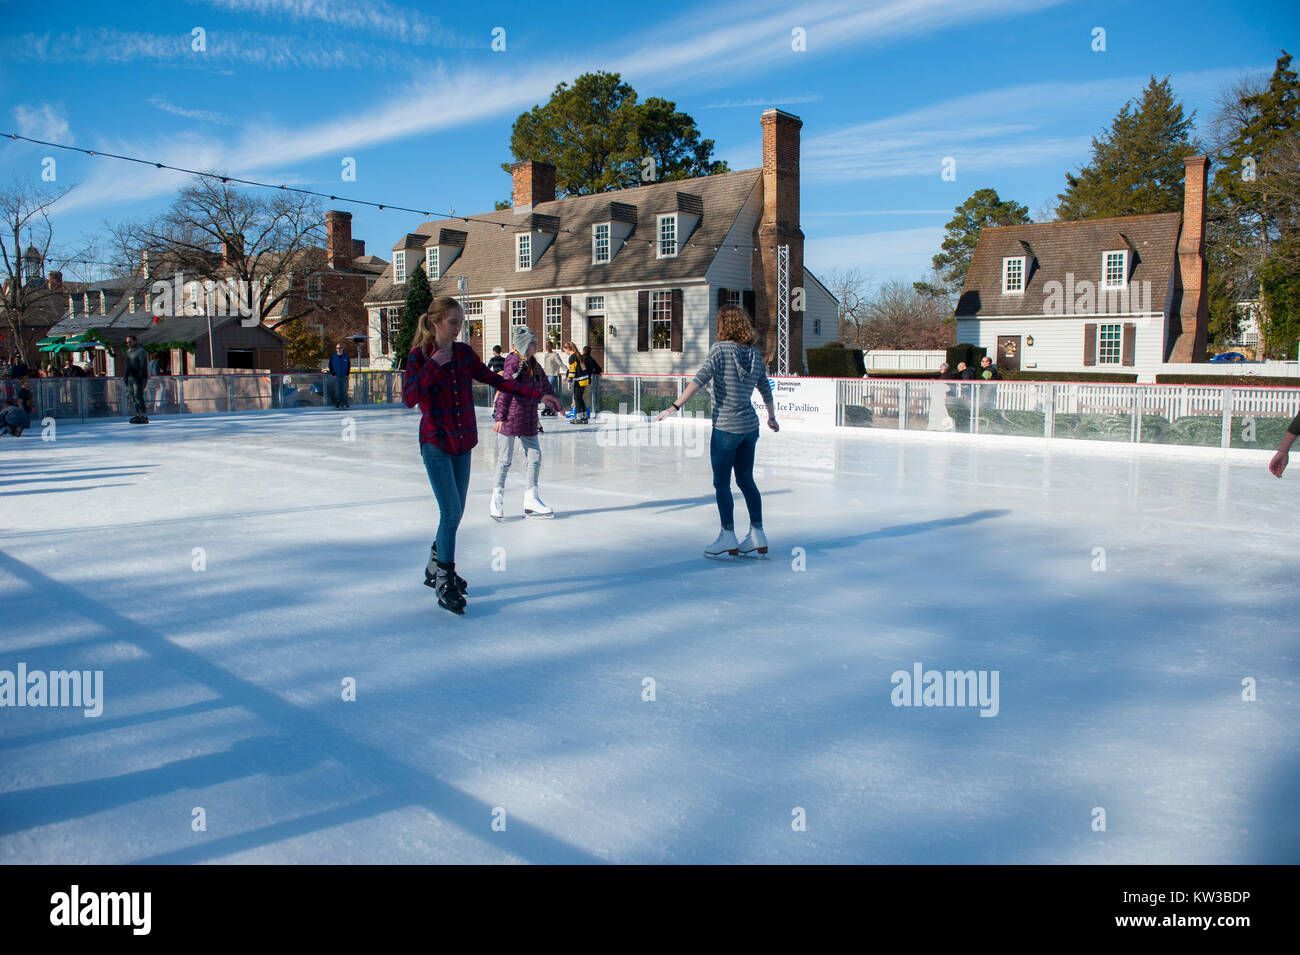 USA Virginia VA Colonial Williamsburg Winter Christmas Ice Skating on a small rink on the Duke of Gloucester Street during the holiday season Stock Photo